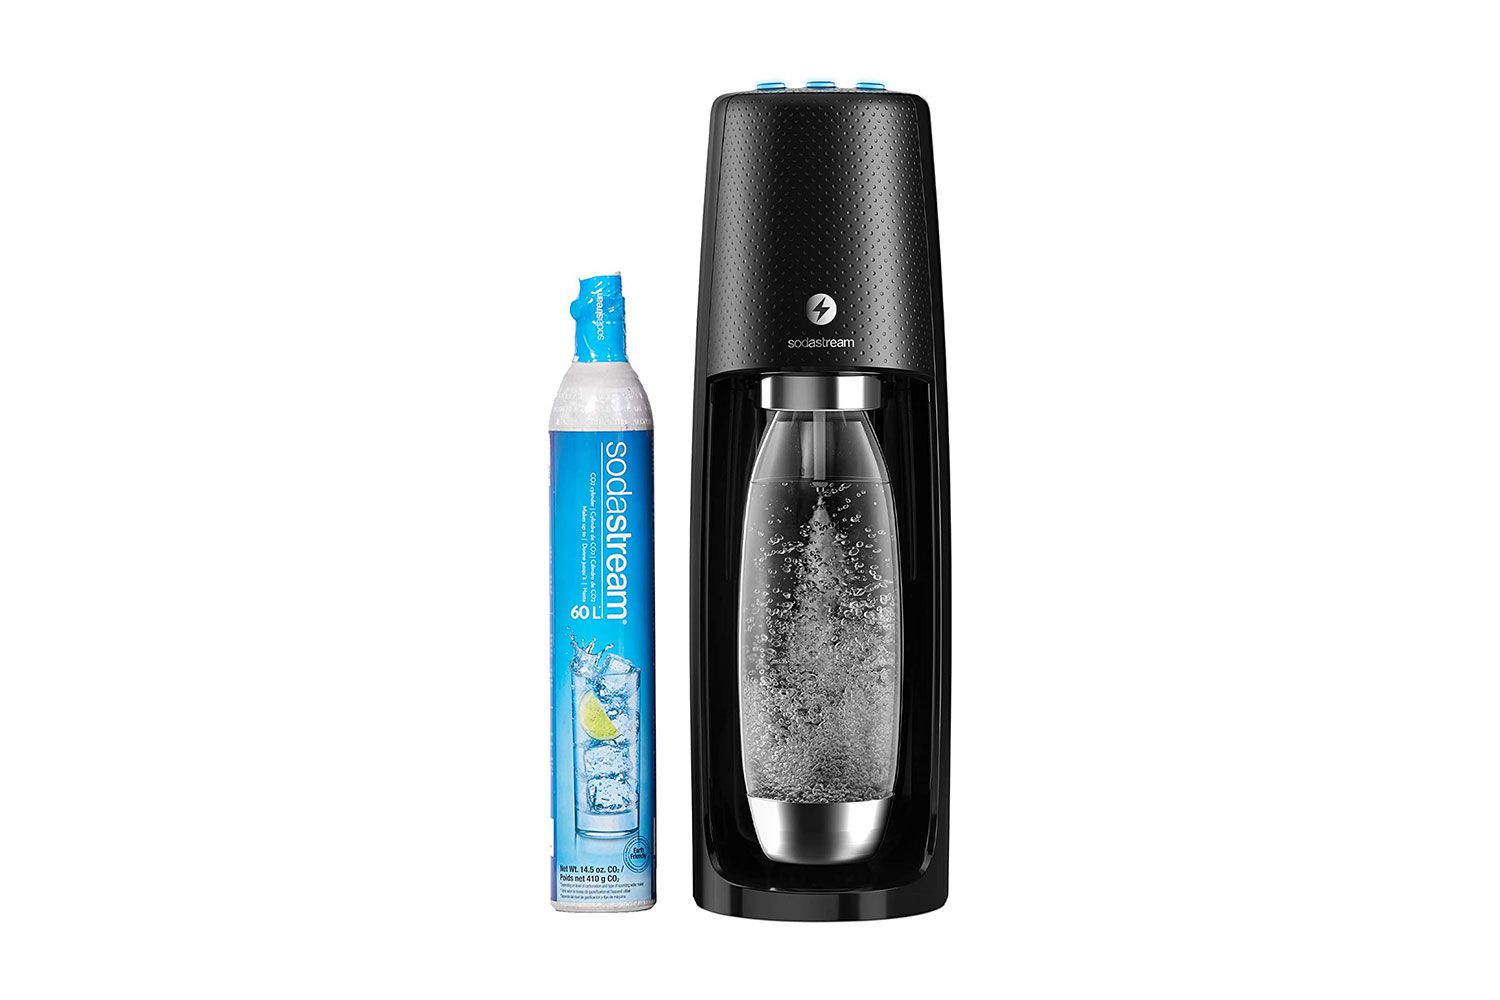 SodaStream Fizzi One Touch Sparkling Water Maker